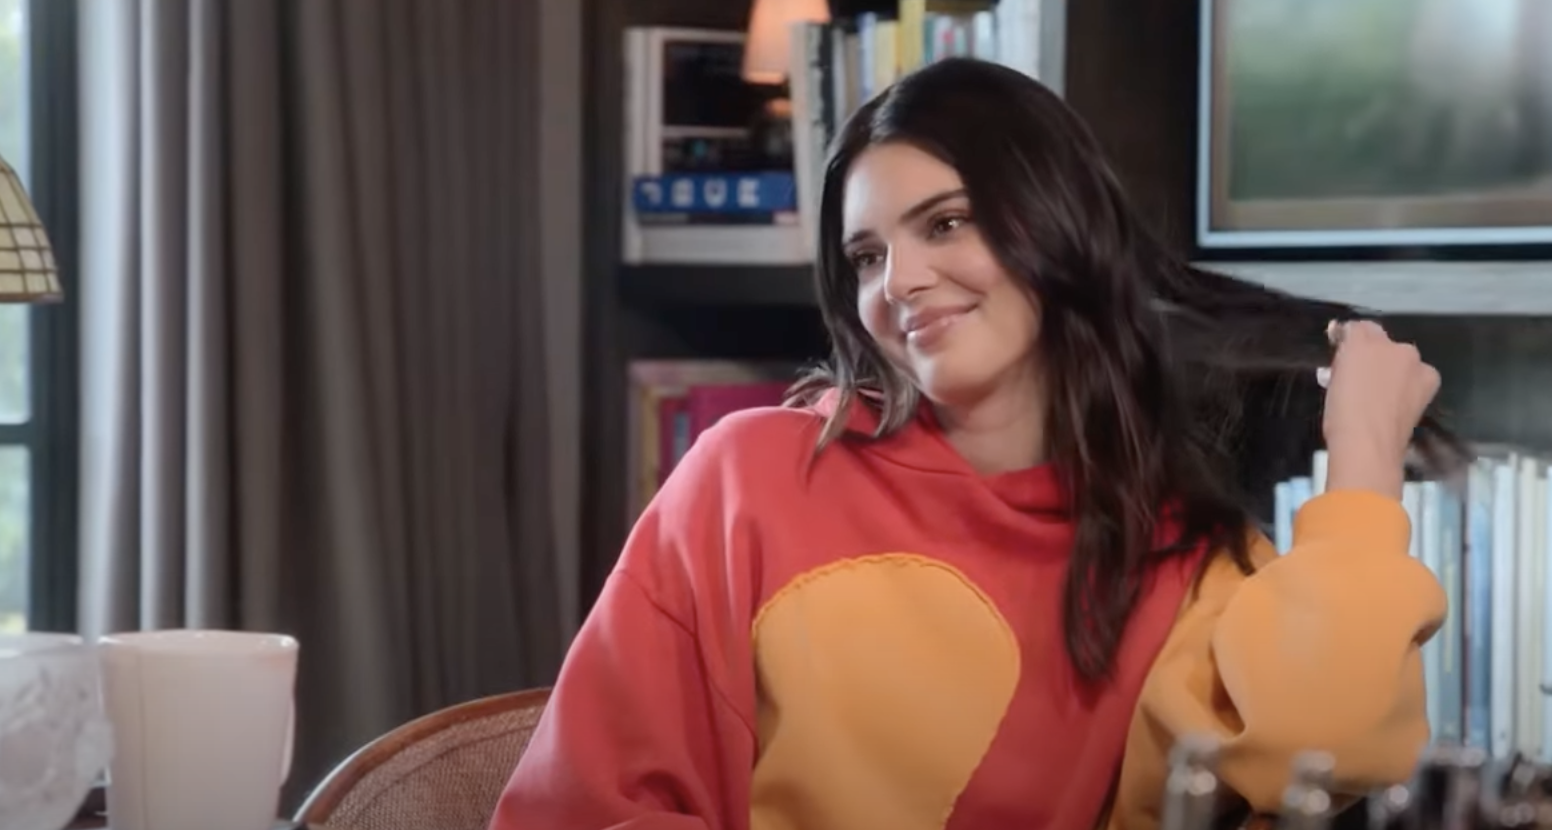 Kendall smiling and touching her hair